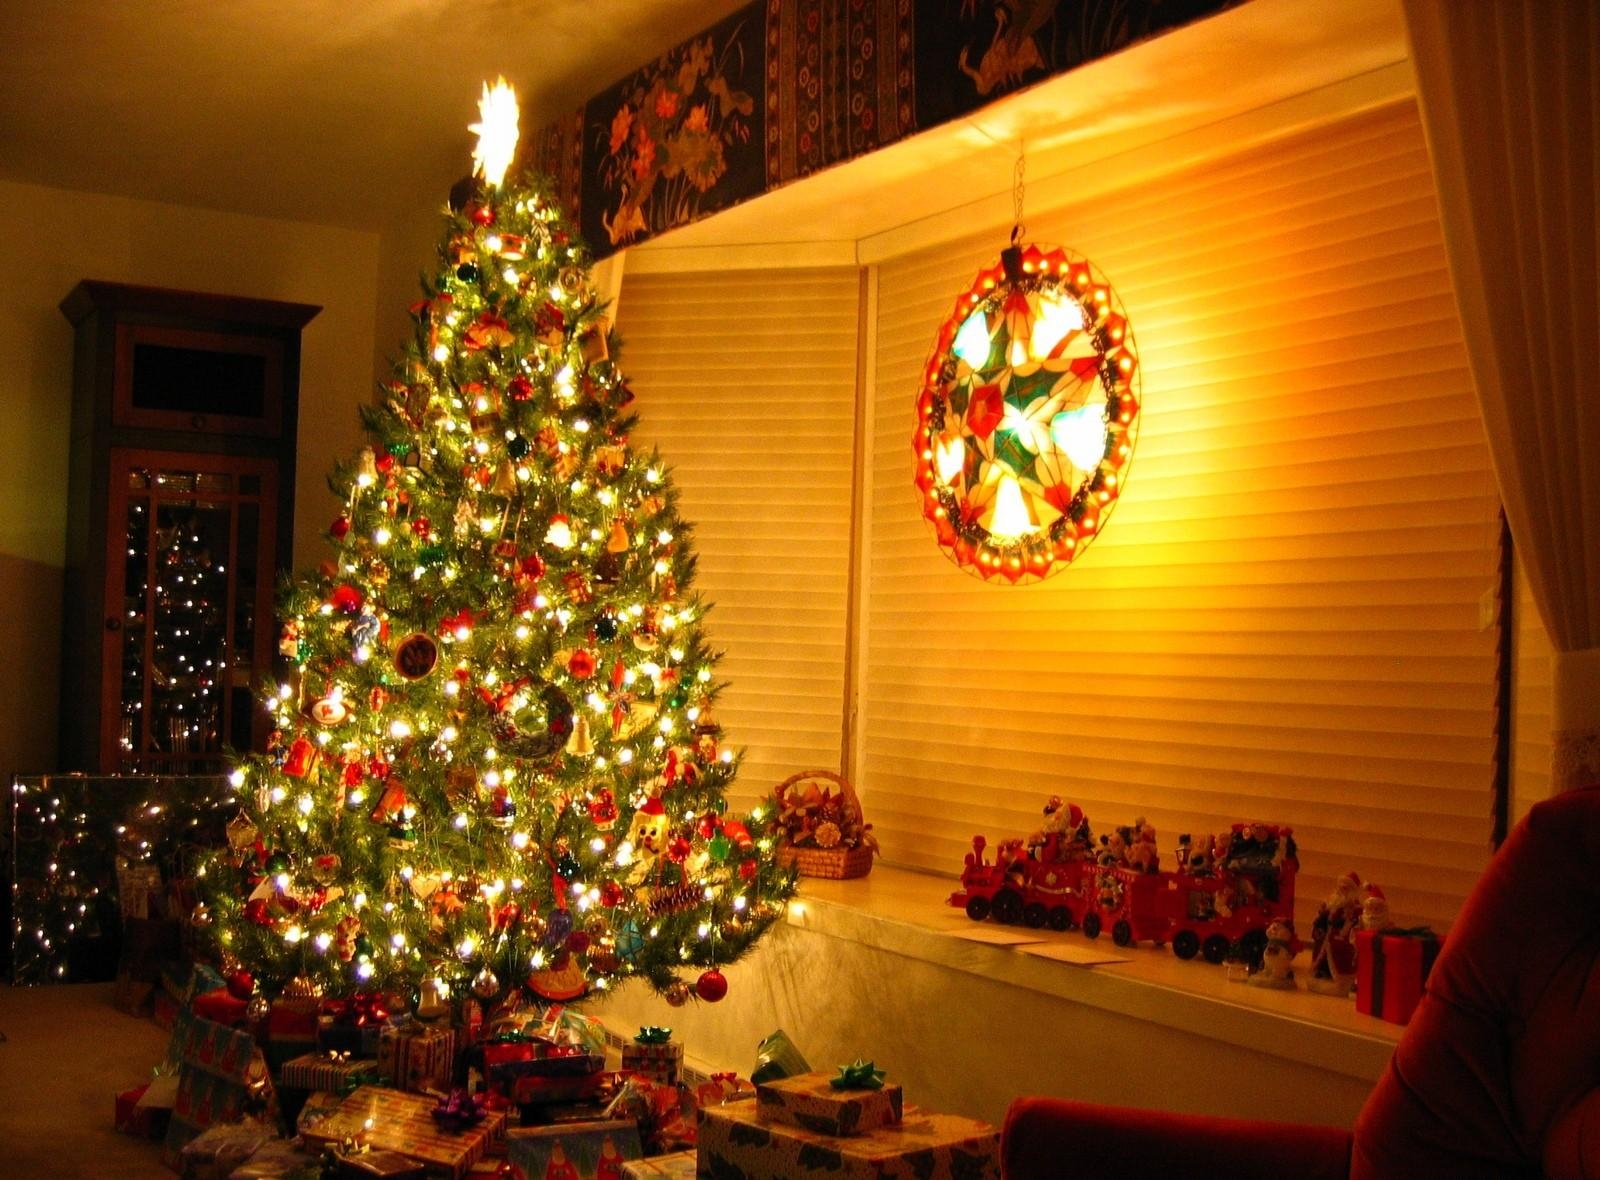 holidays, new year, decorations, toys, christmas, holiday, house, christmas tree, garland, garlands, presents, gifts